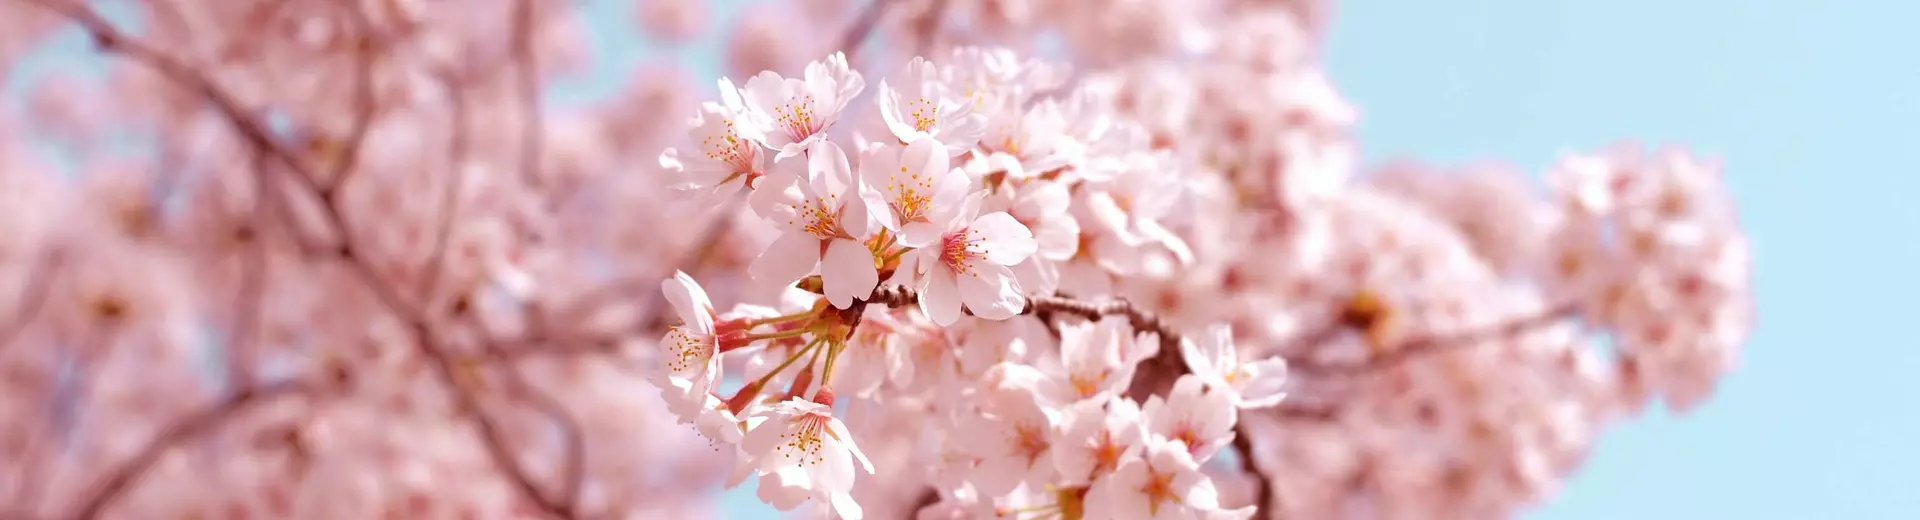 Close up of a cherry tree in full bloom